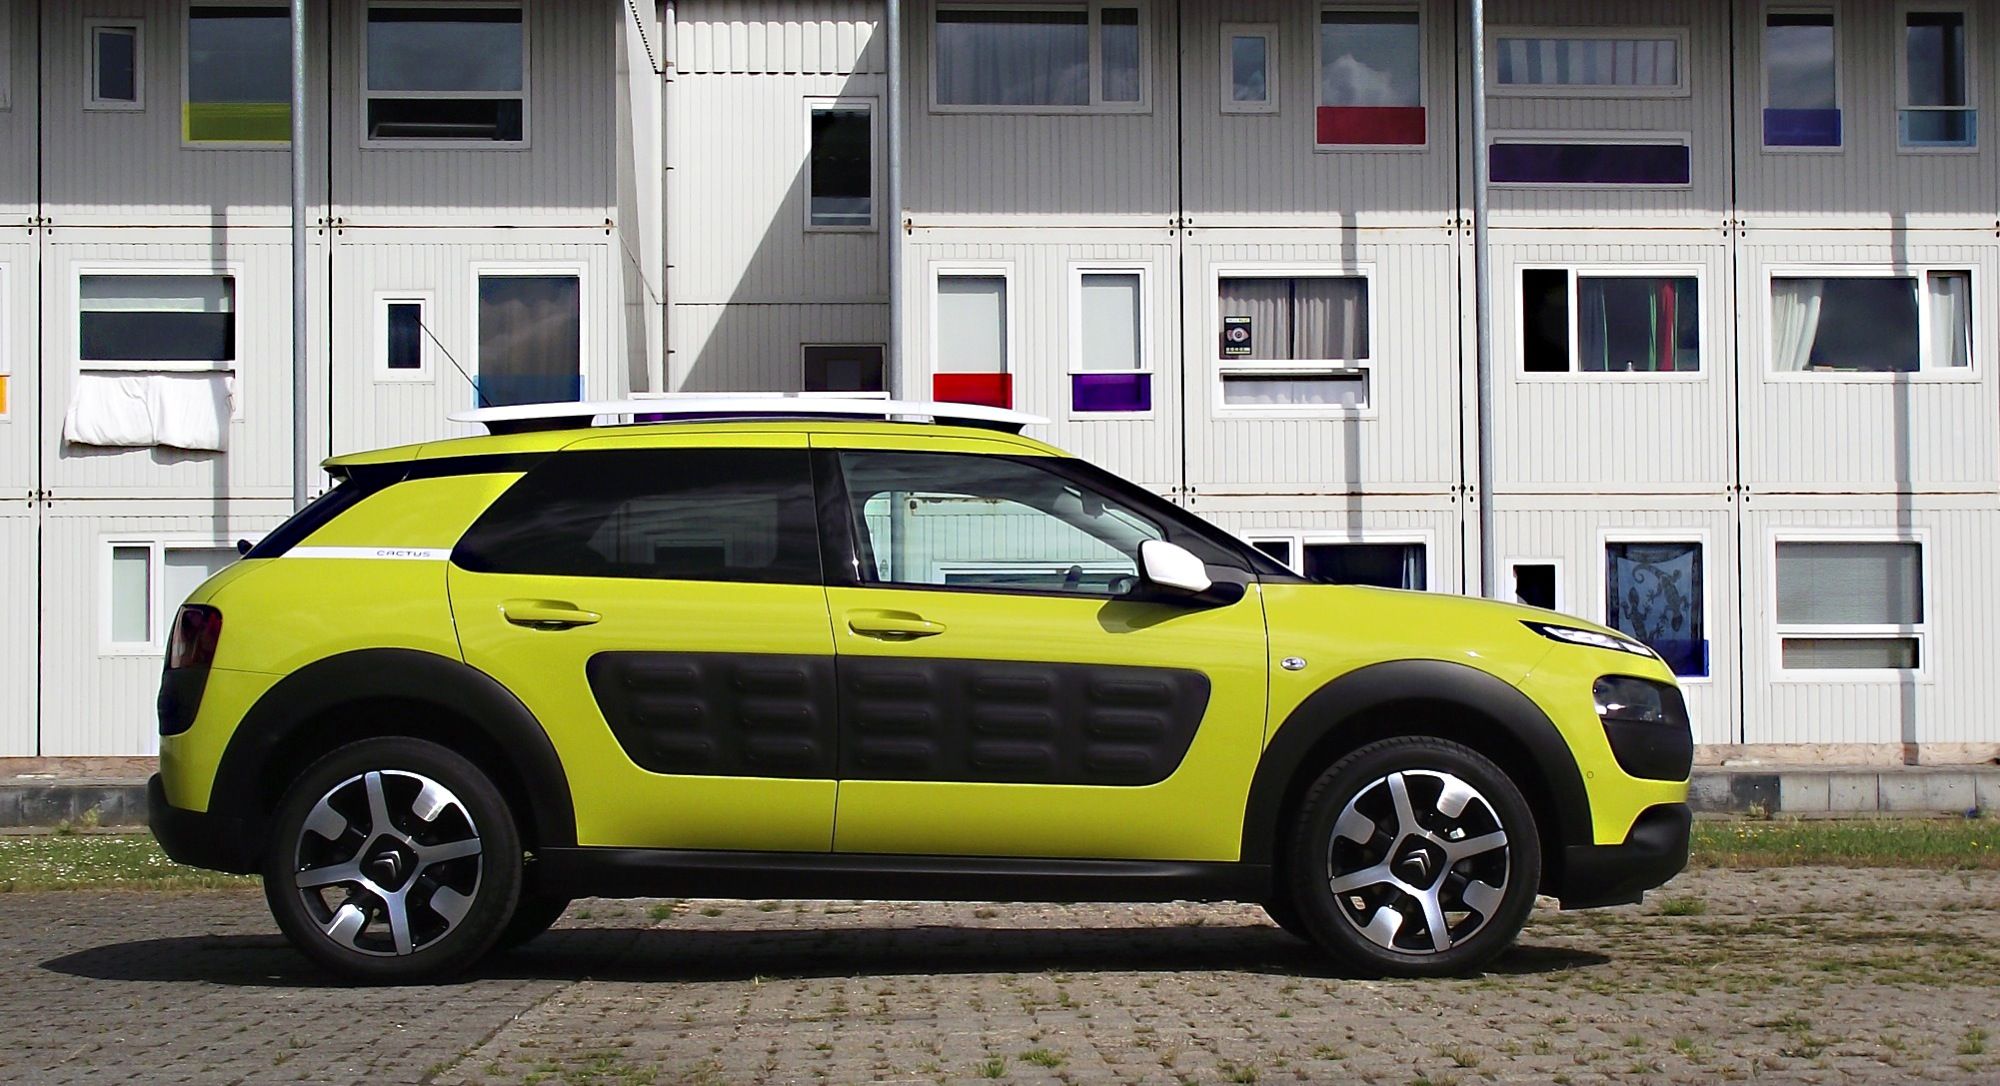 side view of a yellow 2014 Citroën C4 Cactus